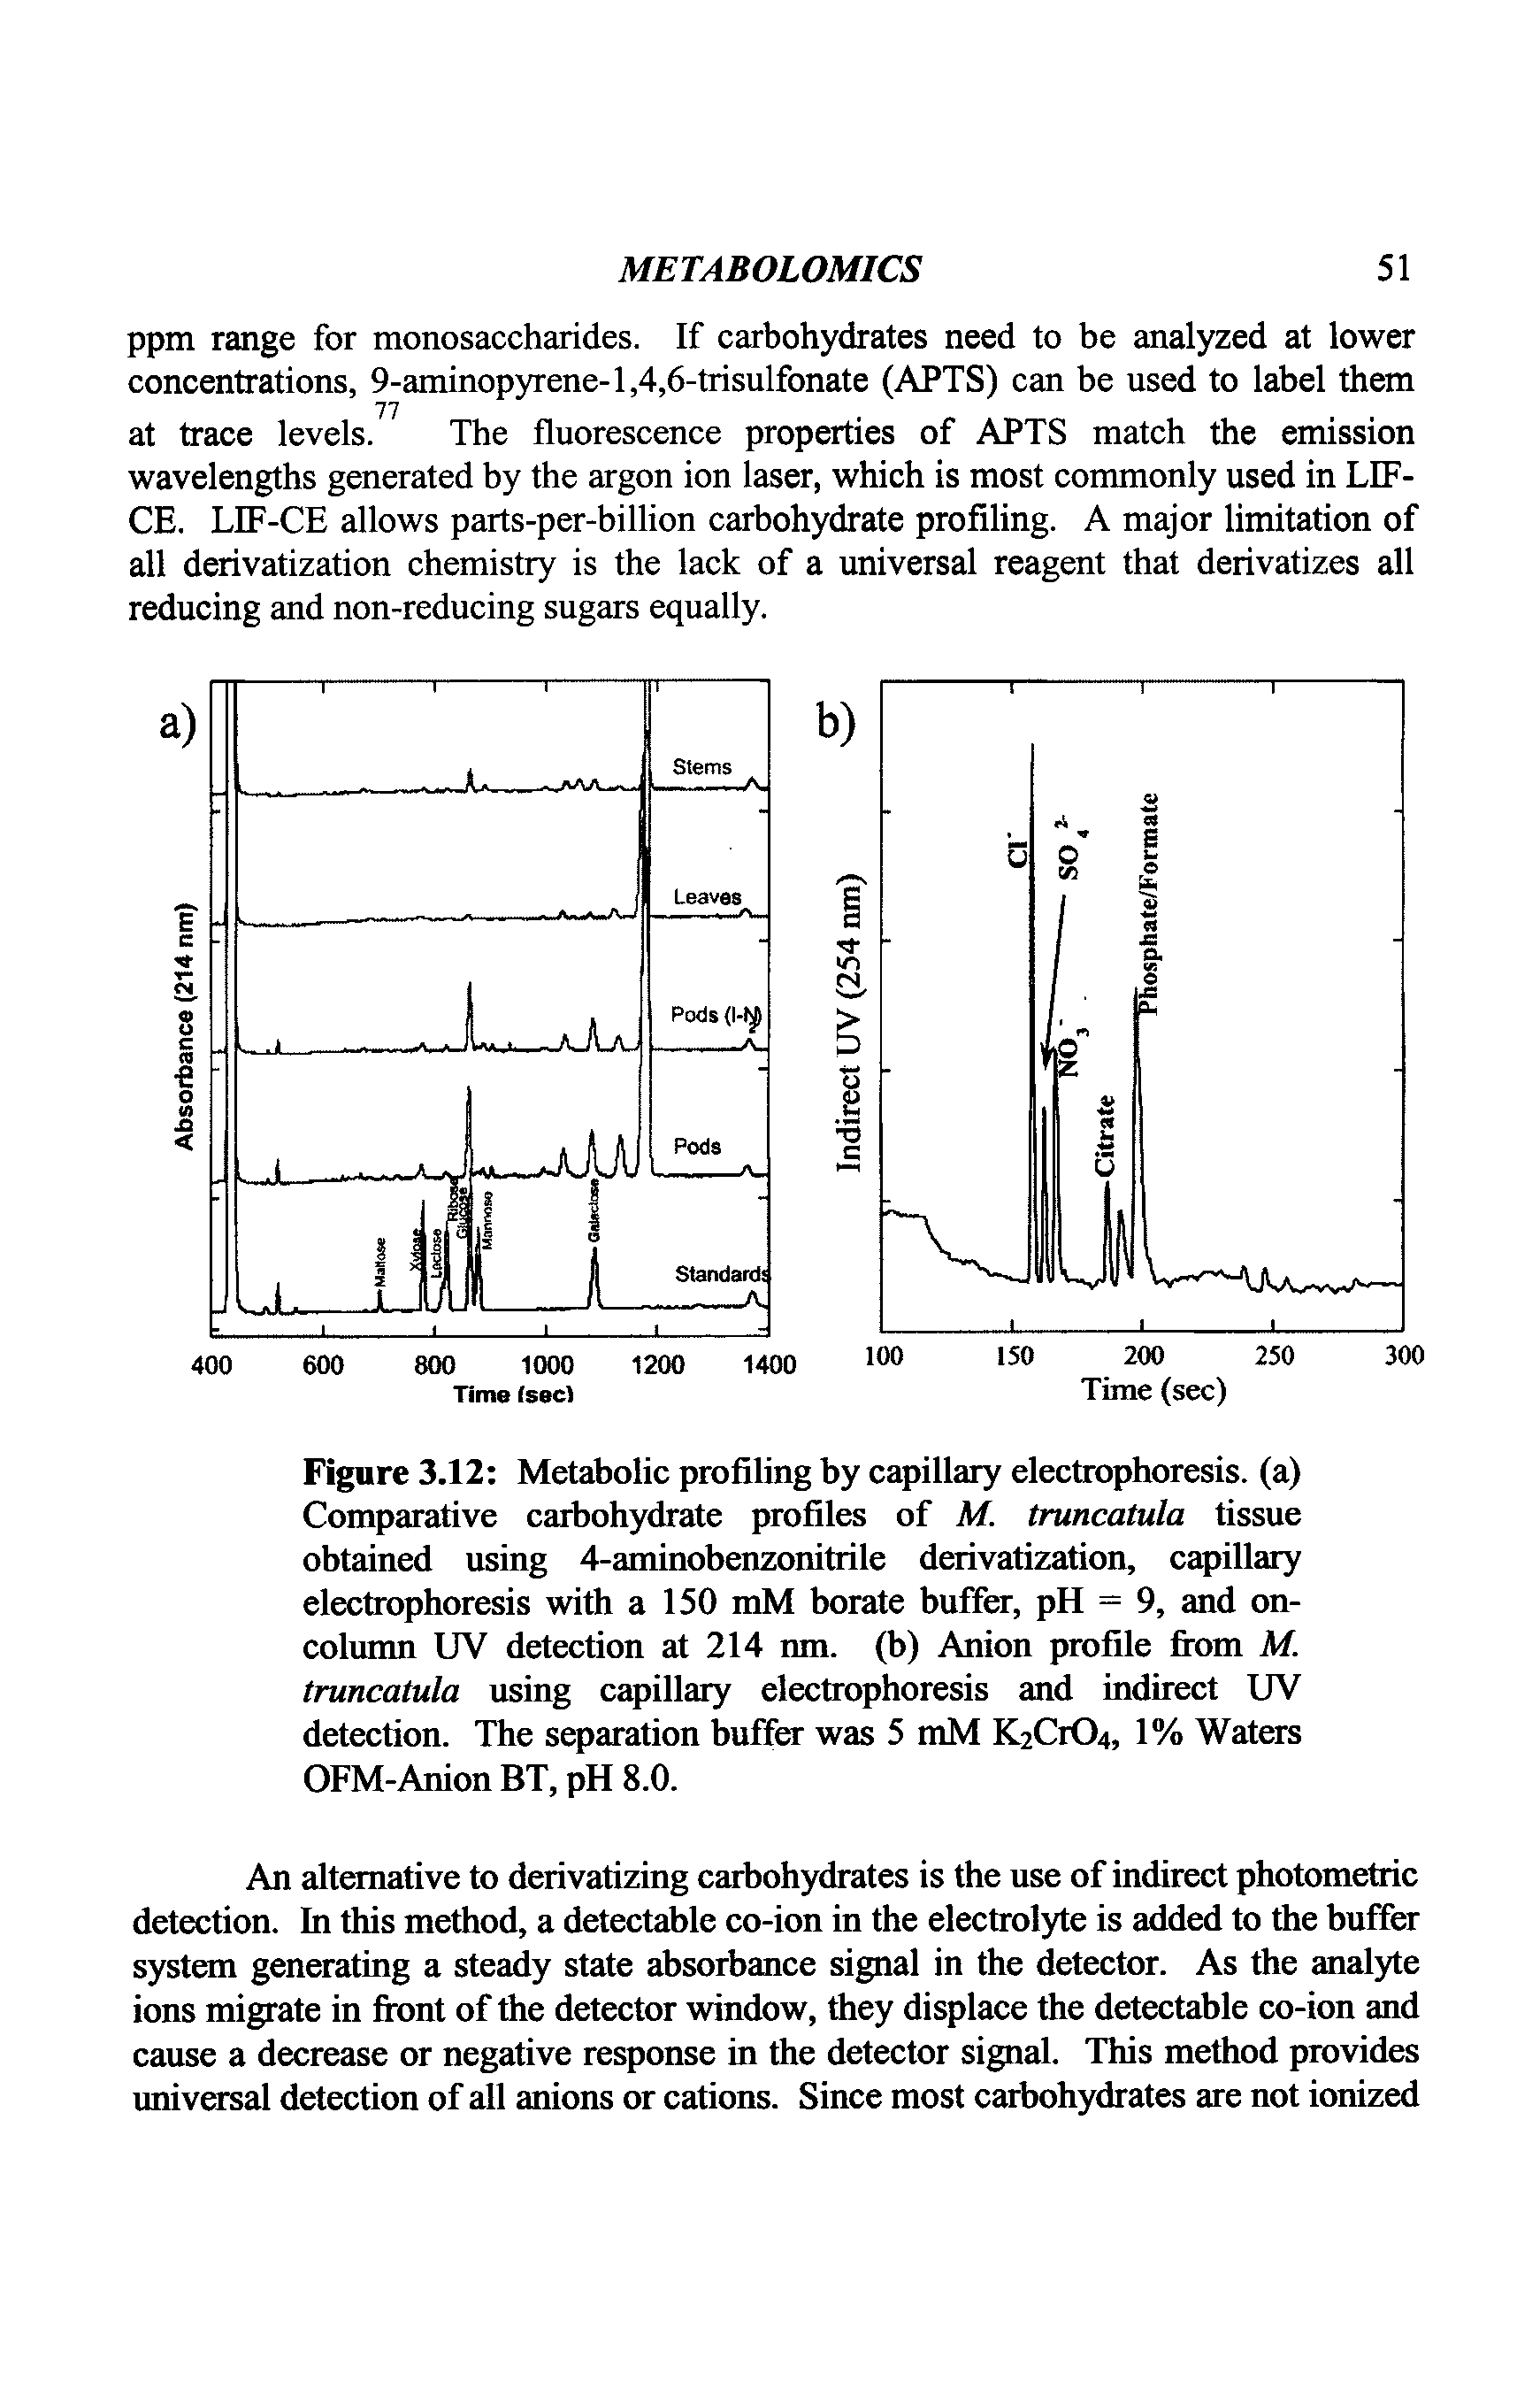 Figure 3.12 Metabolic profiling by capillary electrophoresis, (a) Comparative carbohydrate profiles of M. truncatula tissue obtained using 4-aminobenzonitrile derivatization, capillary electrophoresis with a 150 mM borate buffer, pH = 9, and on-column UV detection at 214 nm. (b) Anion profile from M. truncatula using capillary electrophoresis and indirect UV detection. The separation buffer was 5 mM K2C1O4, 1% Waters OFM-Anion BT, pH 8.0.